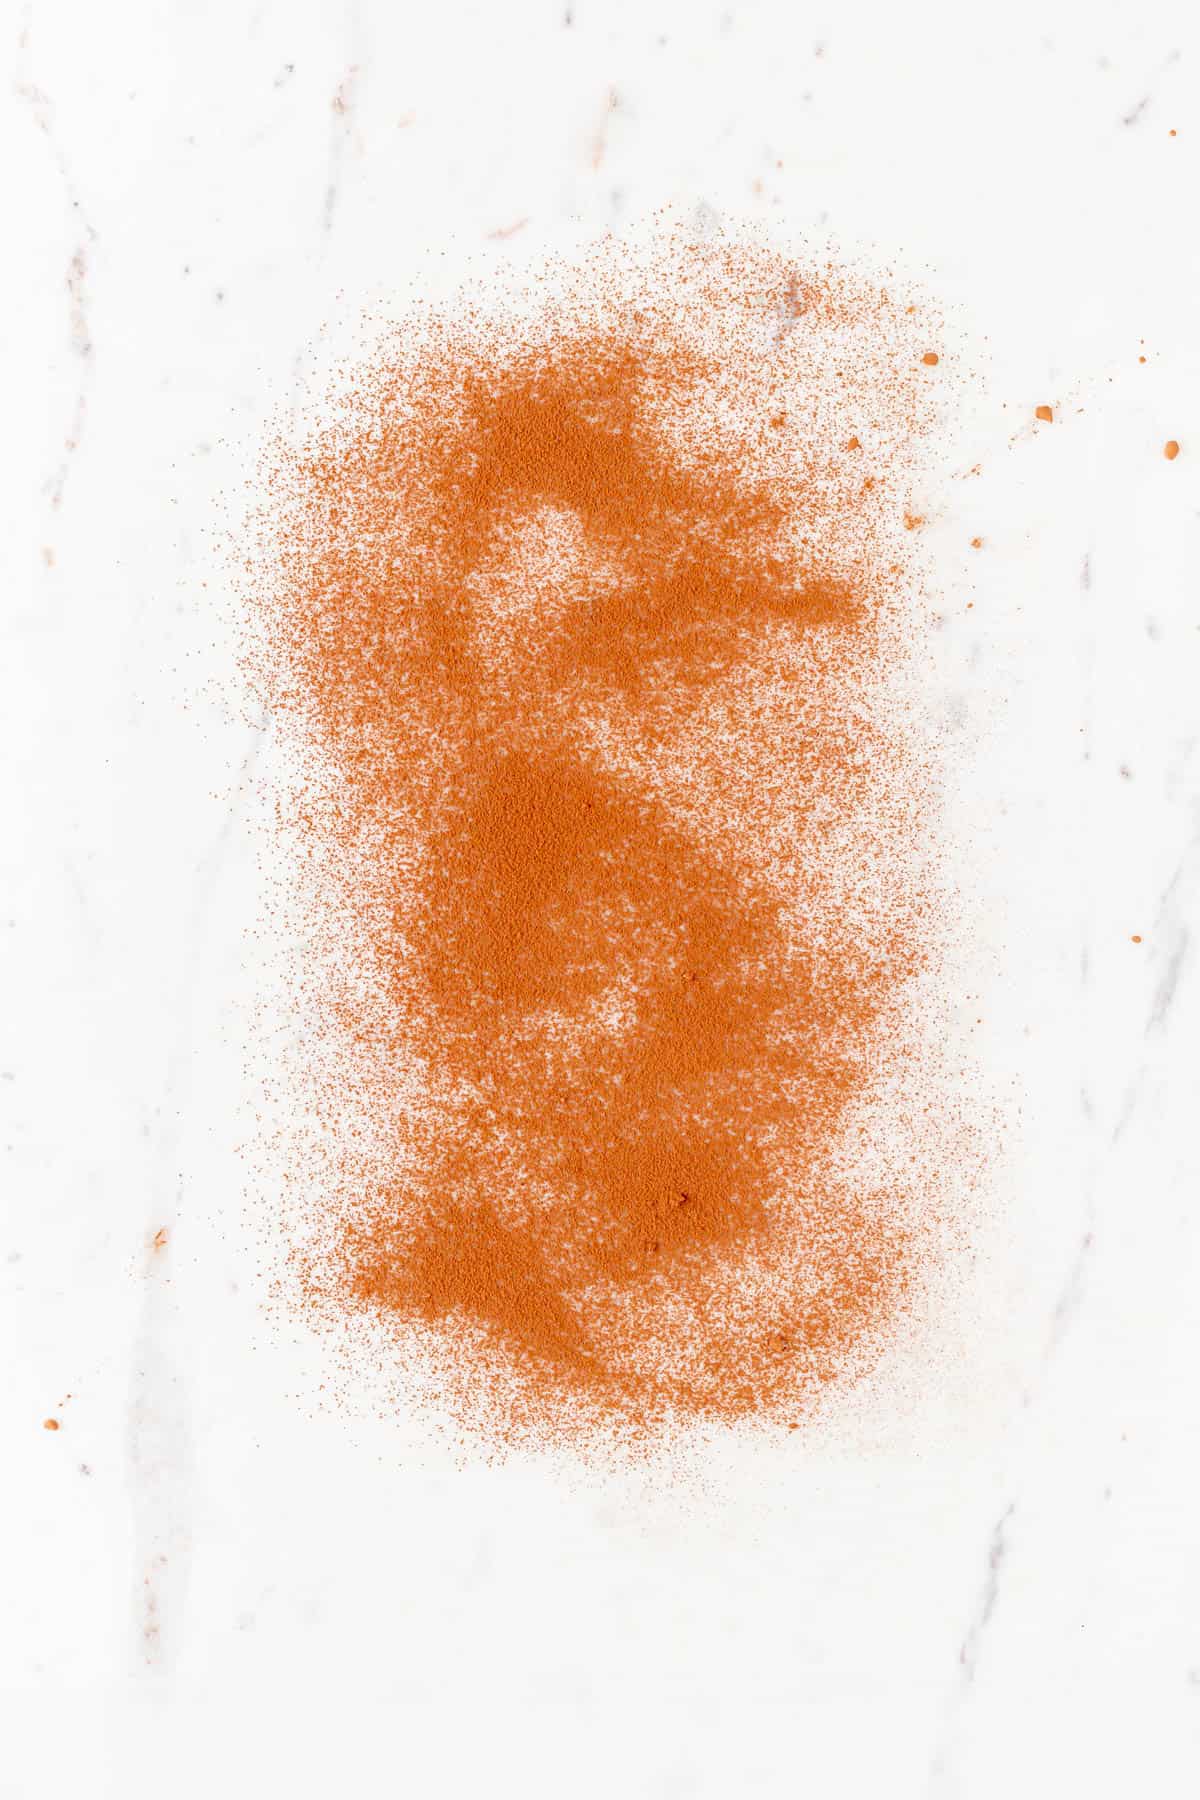 Cocoa powder dusted on a white marble surface